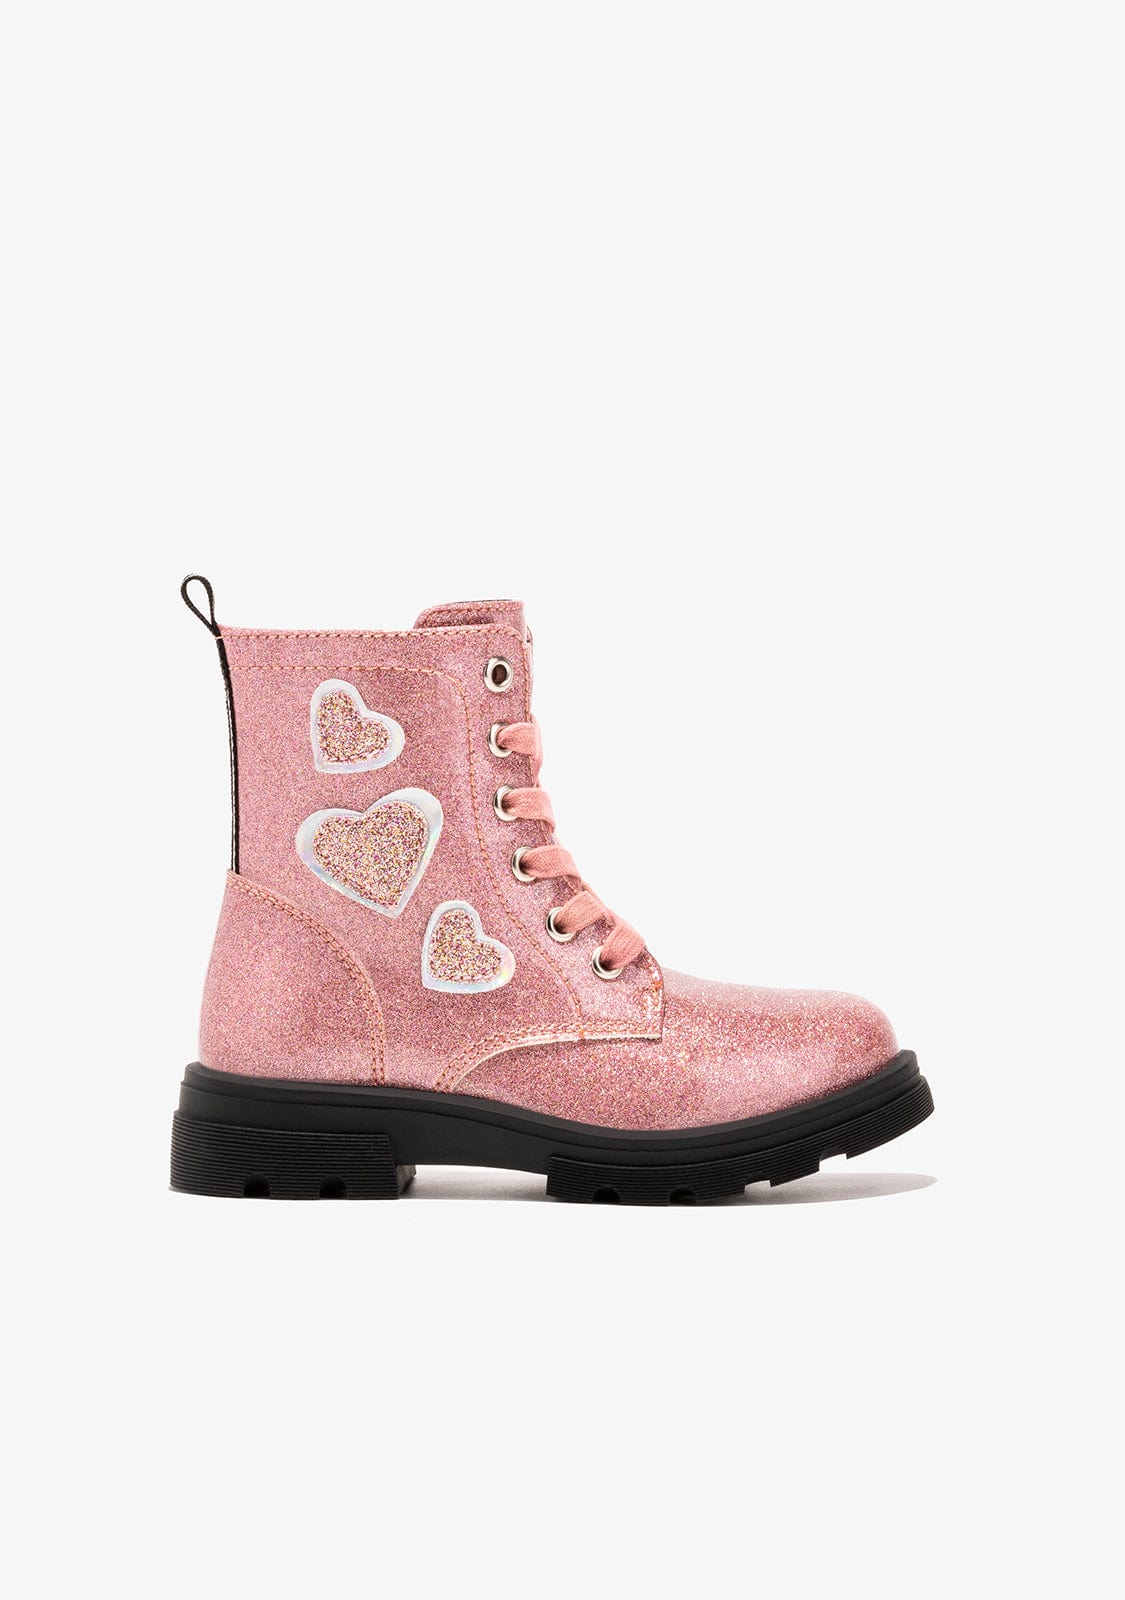 CONGUITOS Shoes Girl's Pink Hearts Cord Ankle Boots